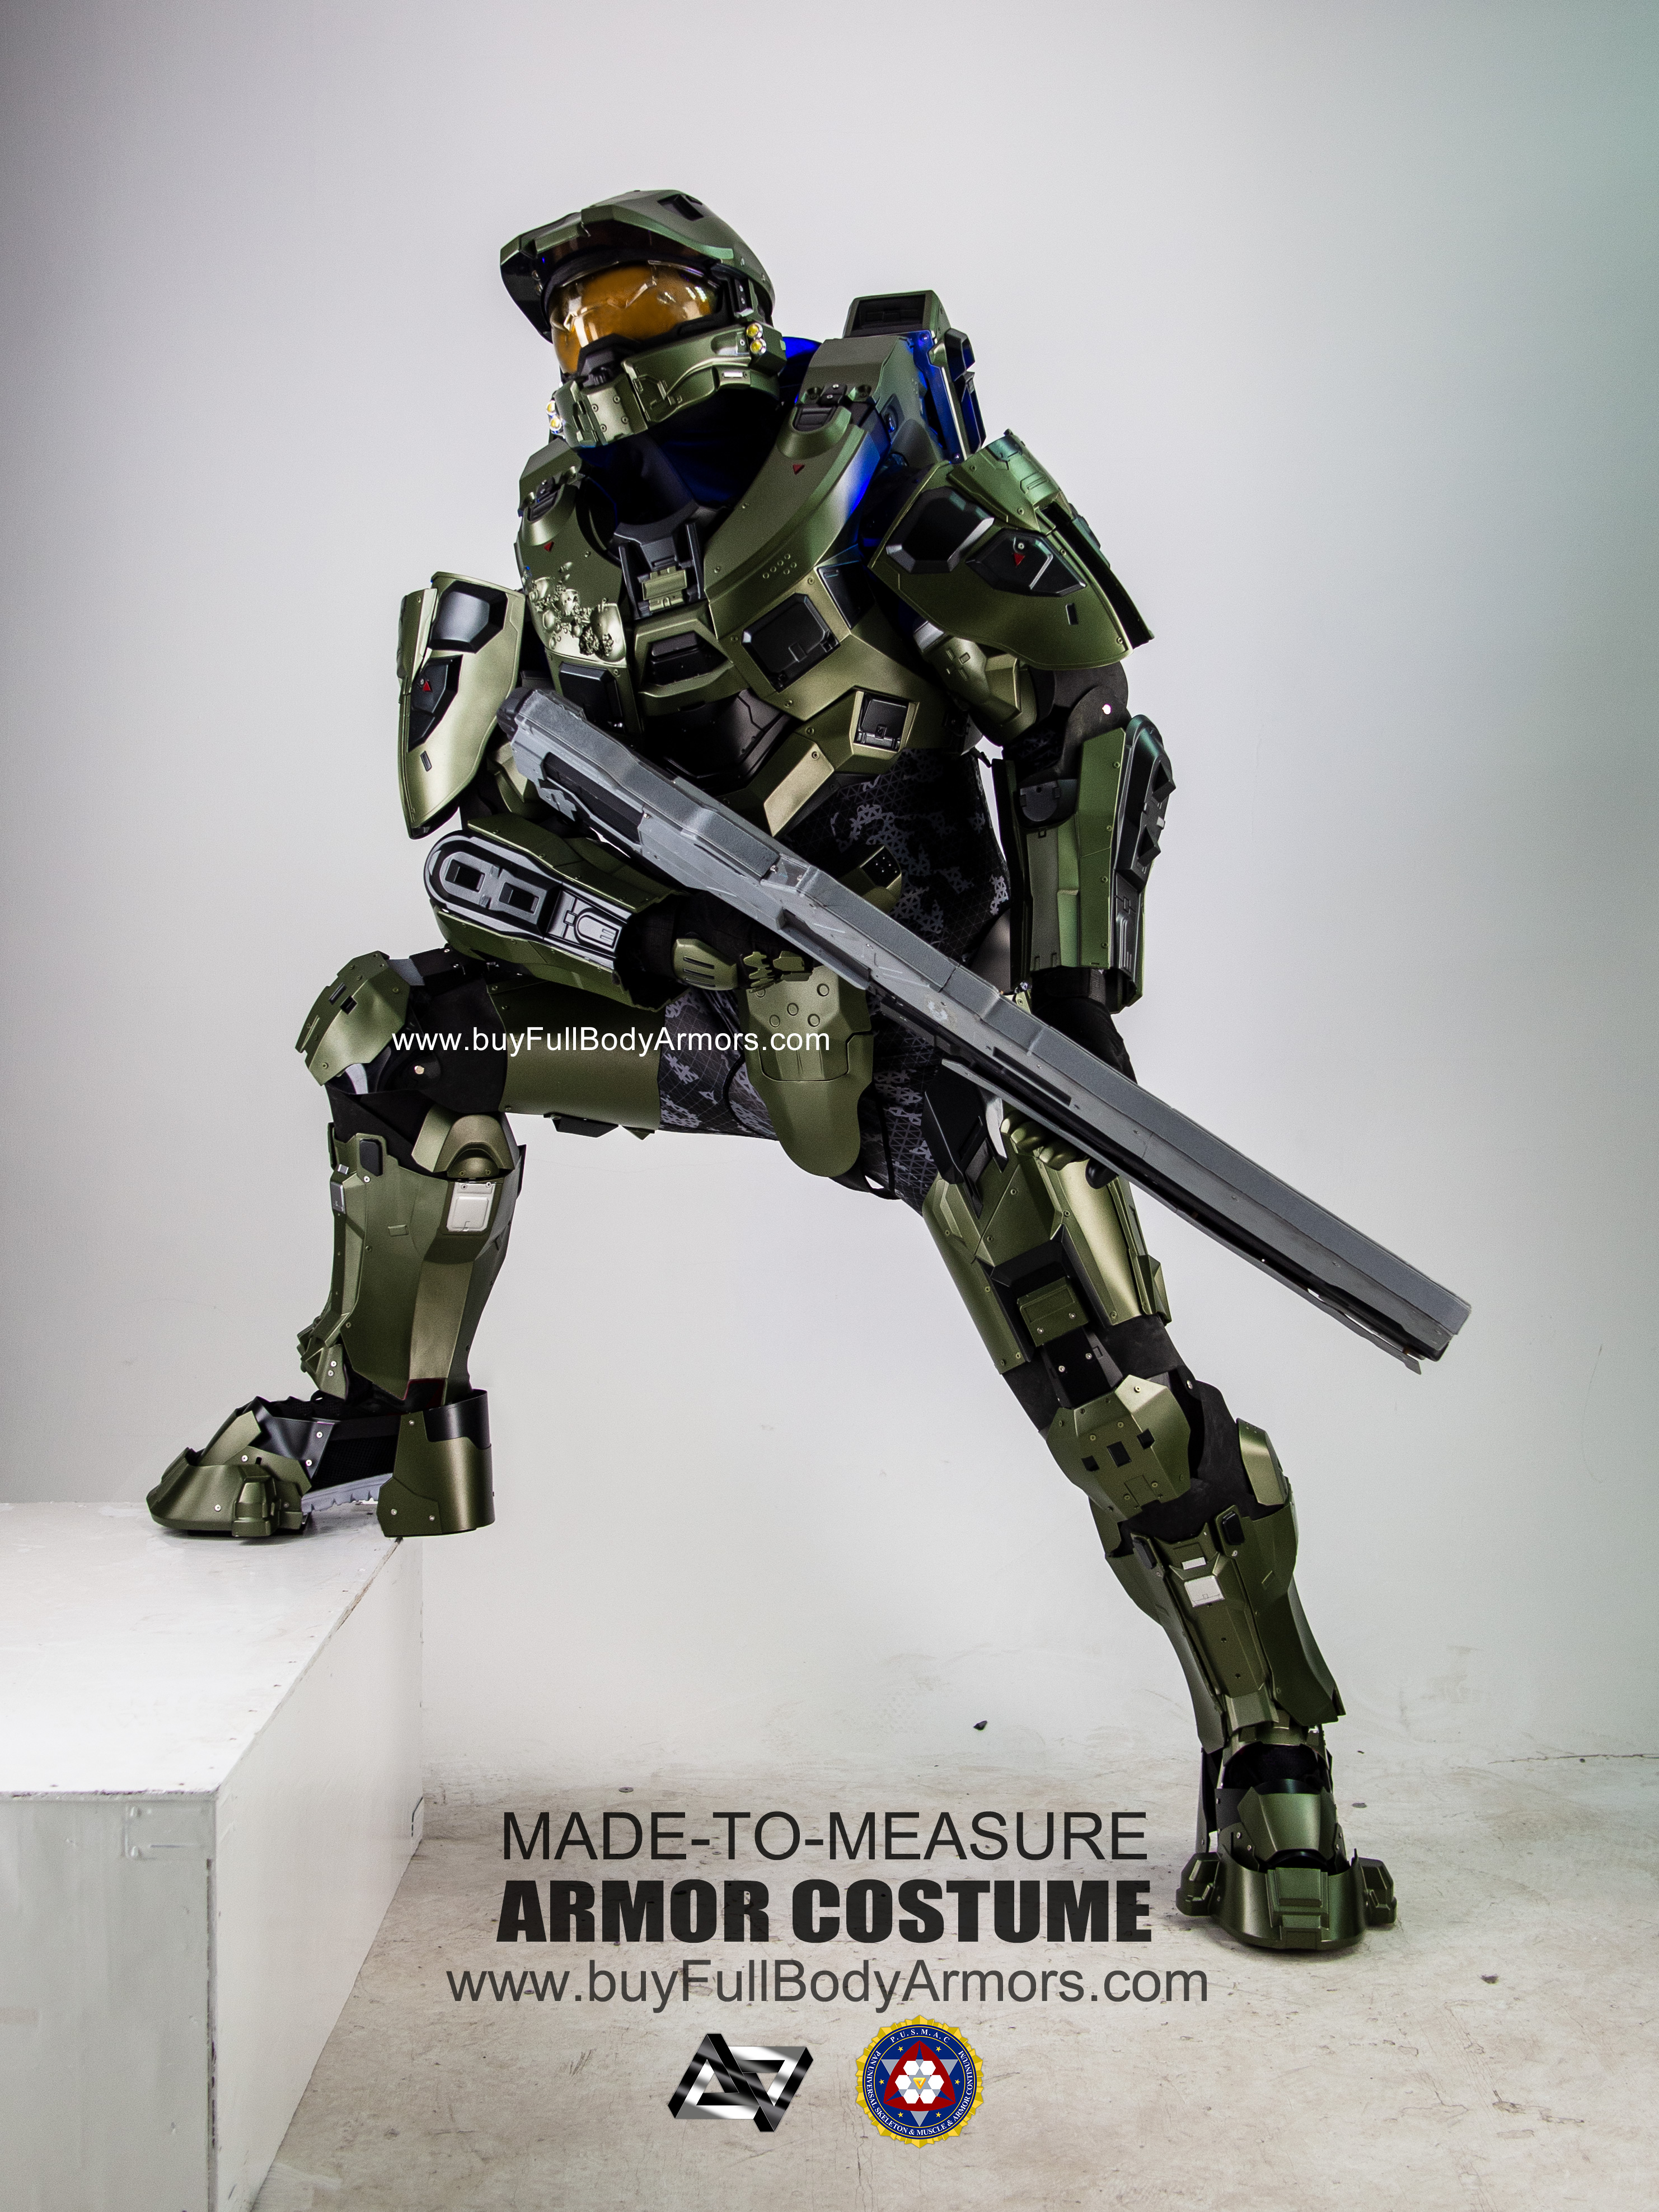 Wearable Halo 4 and Halo 5 Master Chief Armor Mark VI Suit Costume design 3